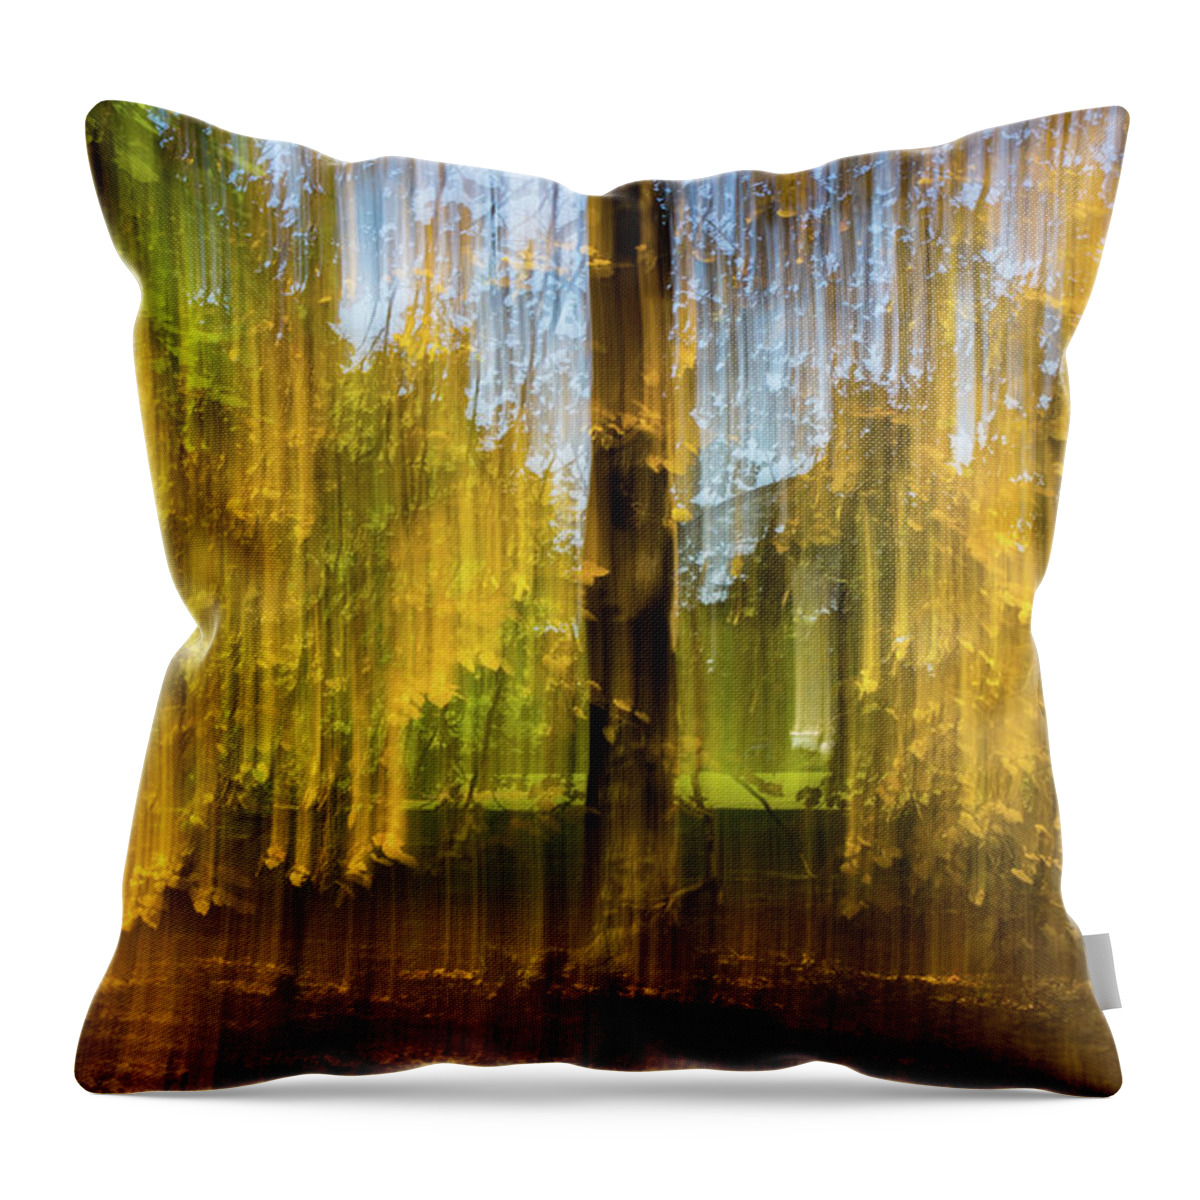  Throw Pillow featuring the photograph Crying by Mache Del Campo